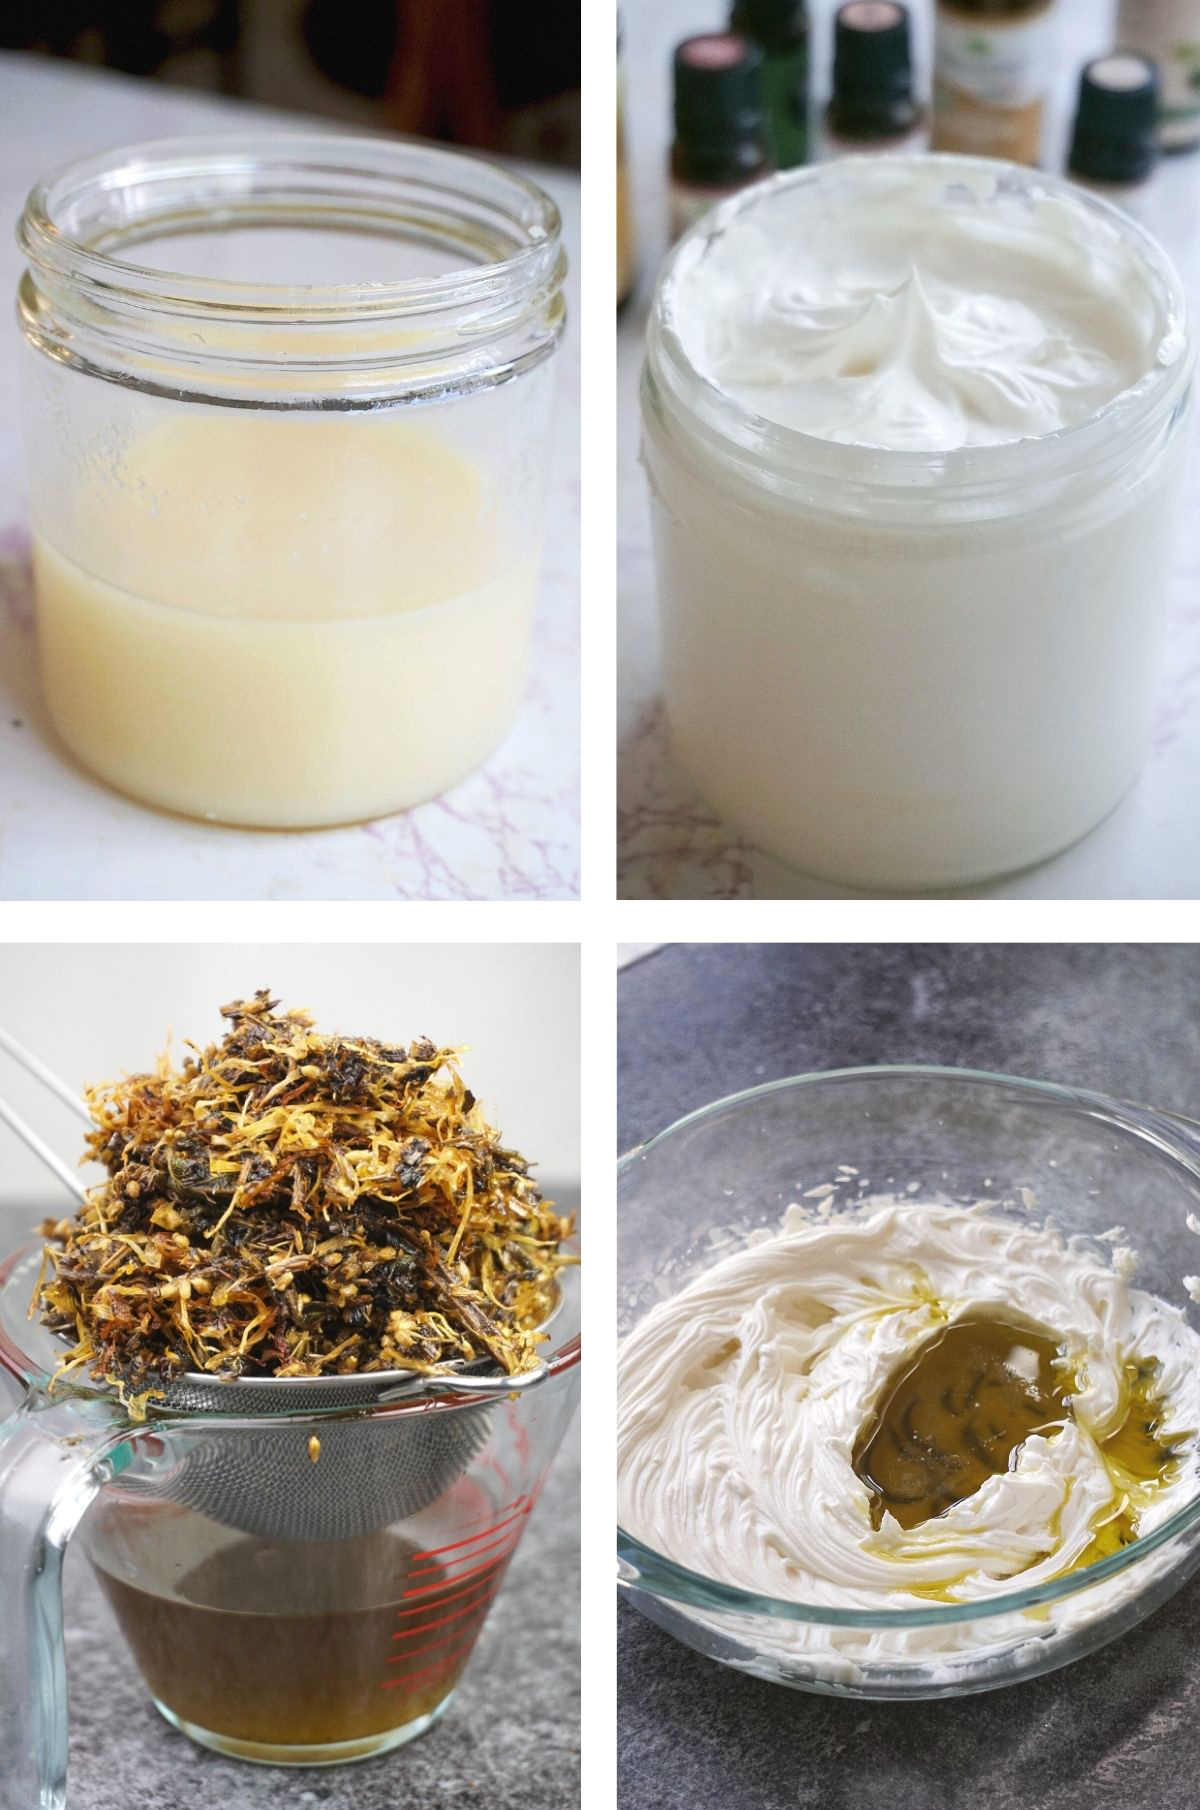 How to make natural homemade face moisturizer.